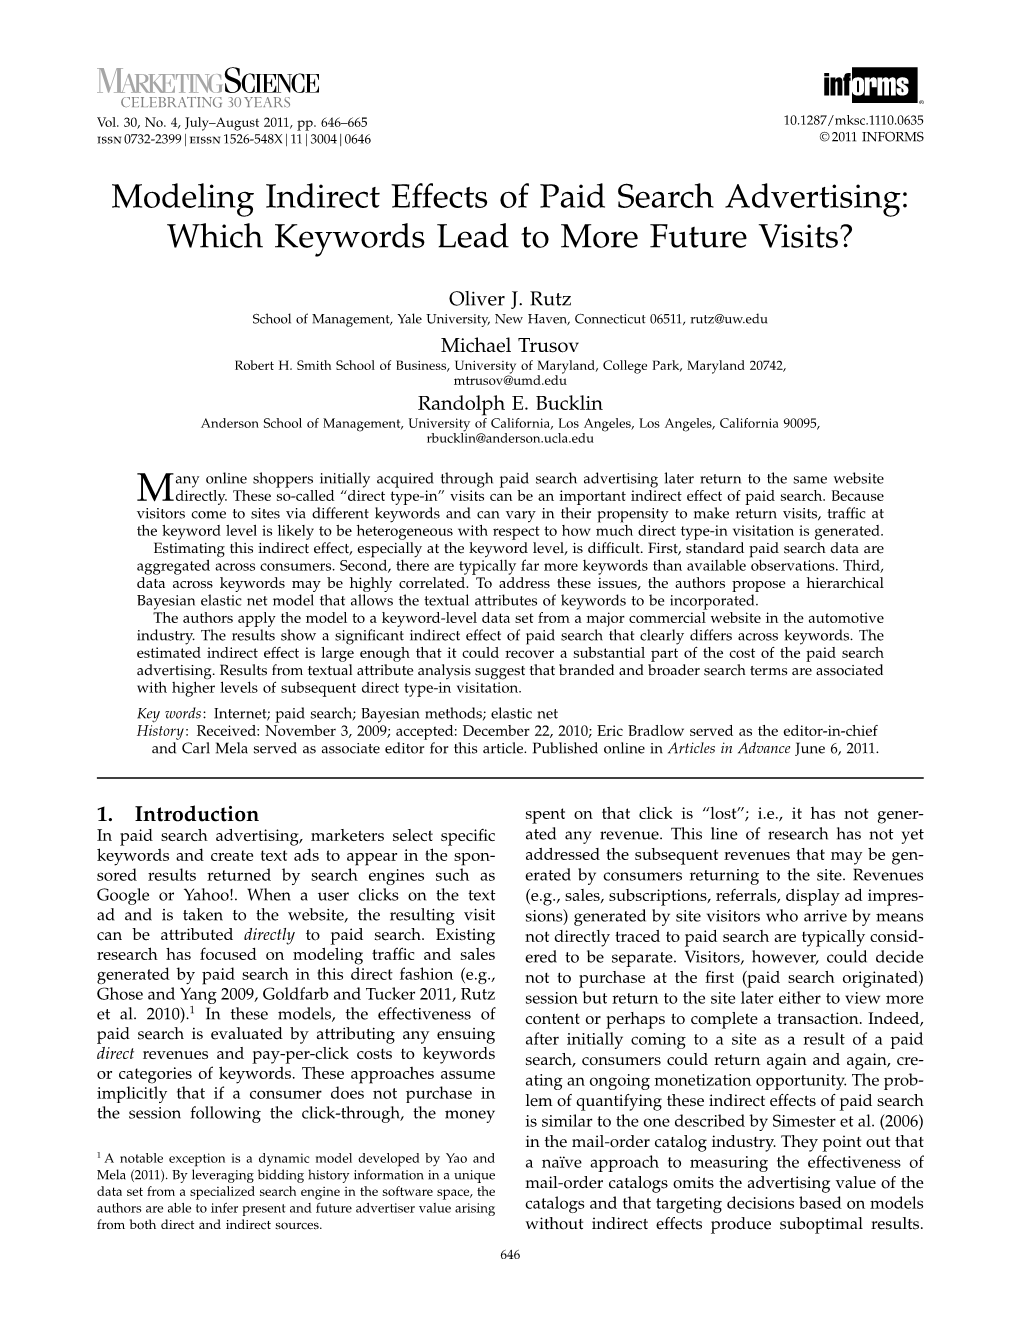 Modeling Indirect Effects of Paid Search Advertising: Which Keywords Lead to More Future Visits?